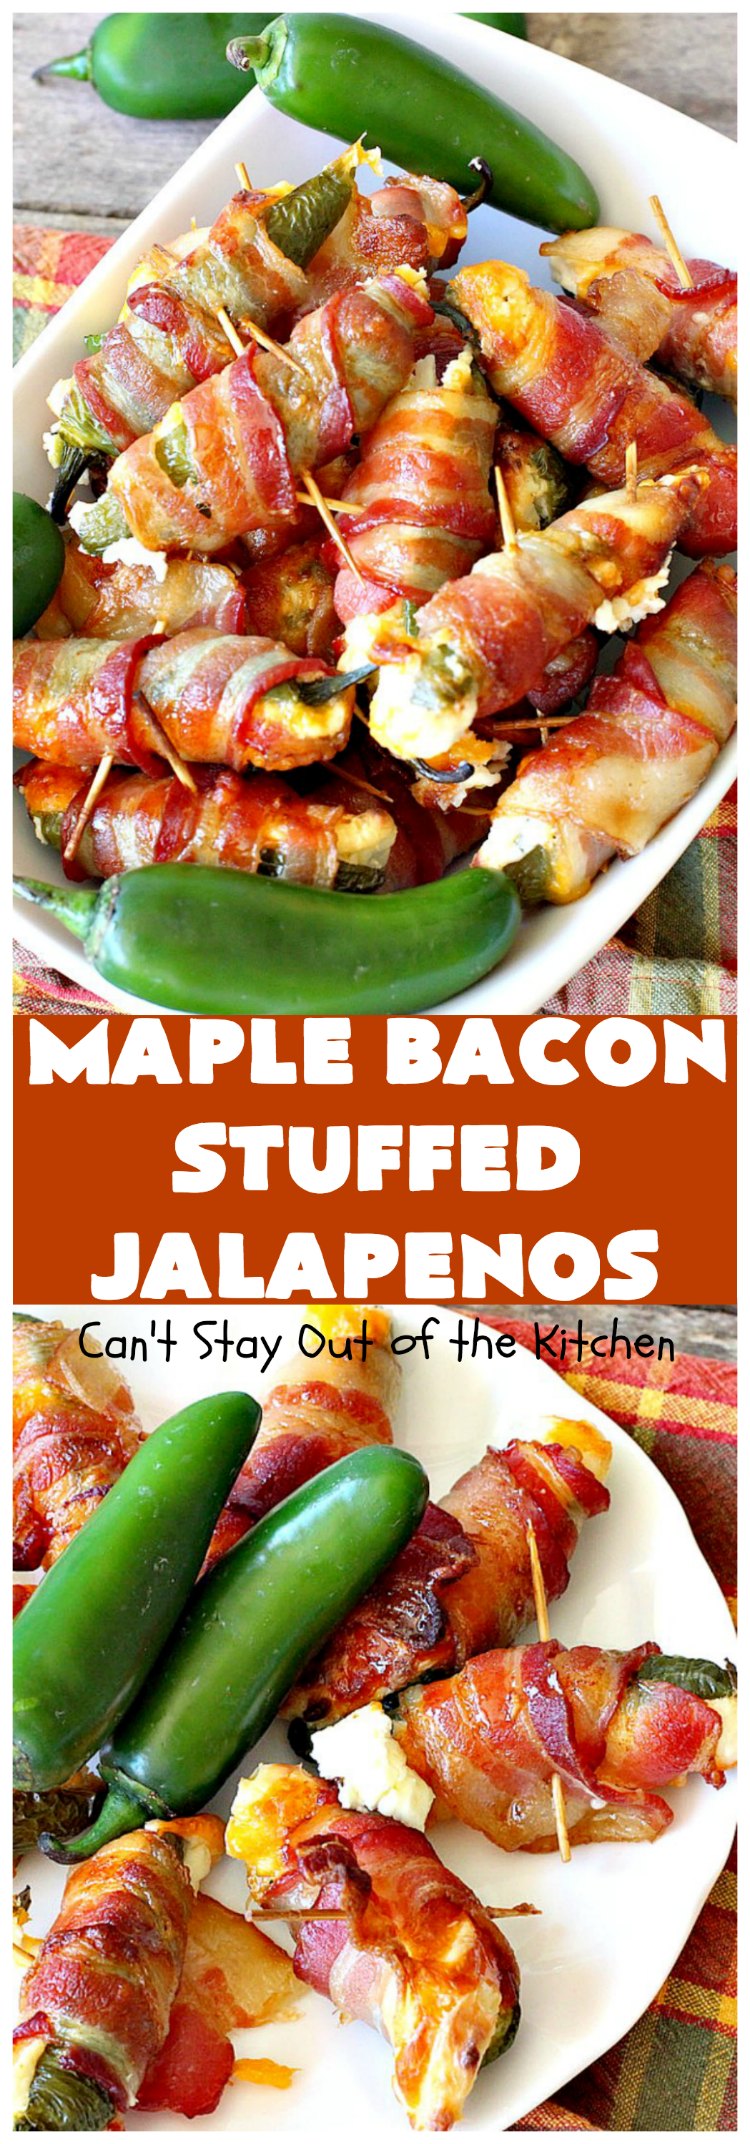 Maple Bacon Stuffed Jalapenos | Can't Stay Out of the Kitchen